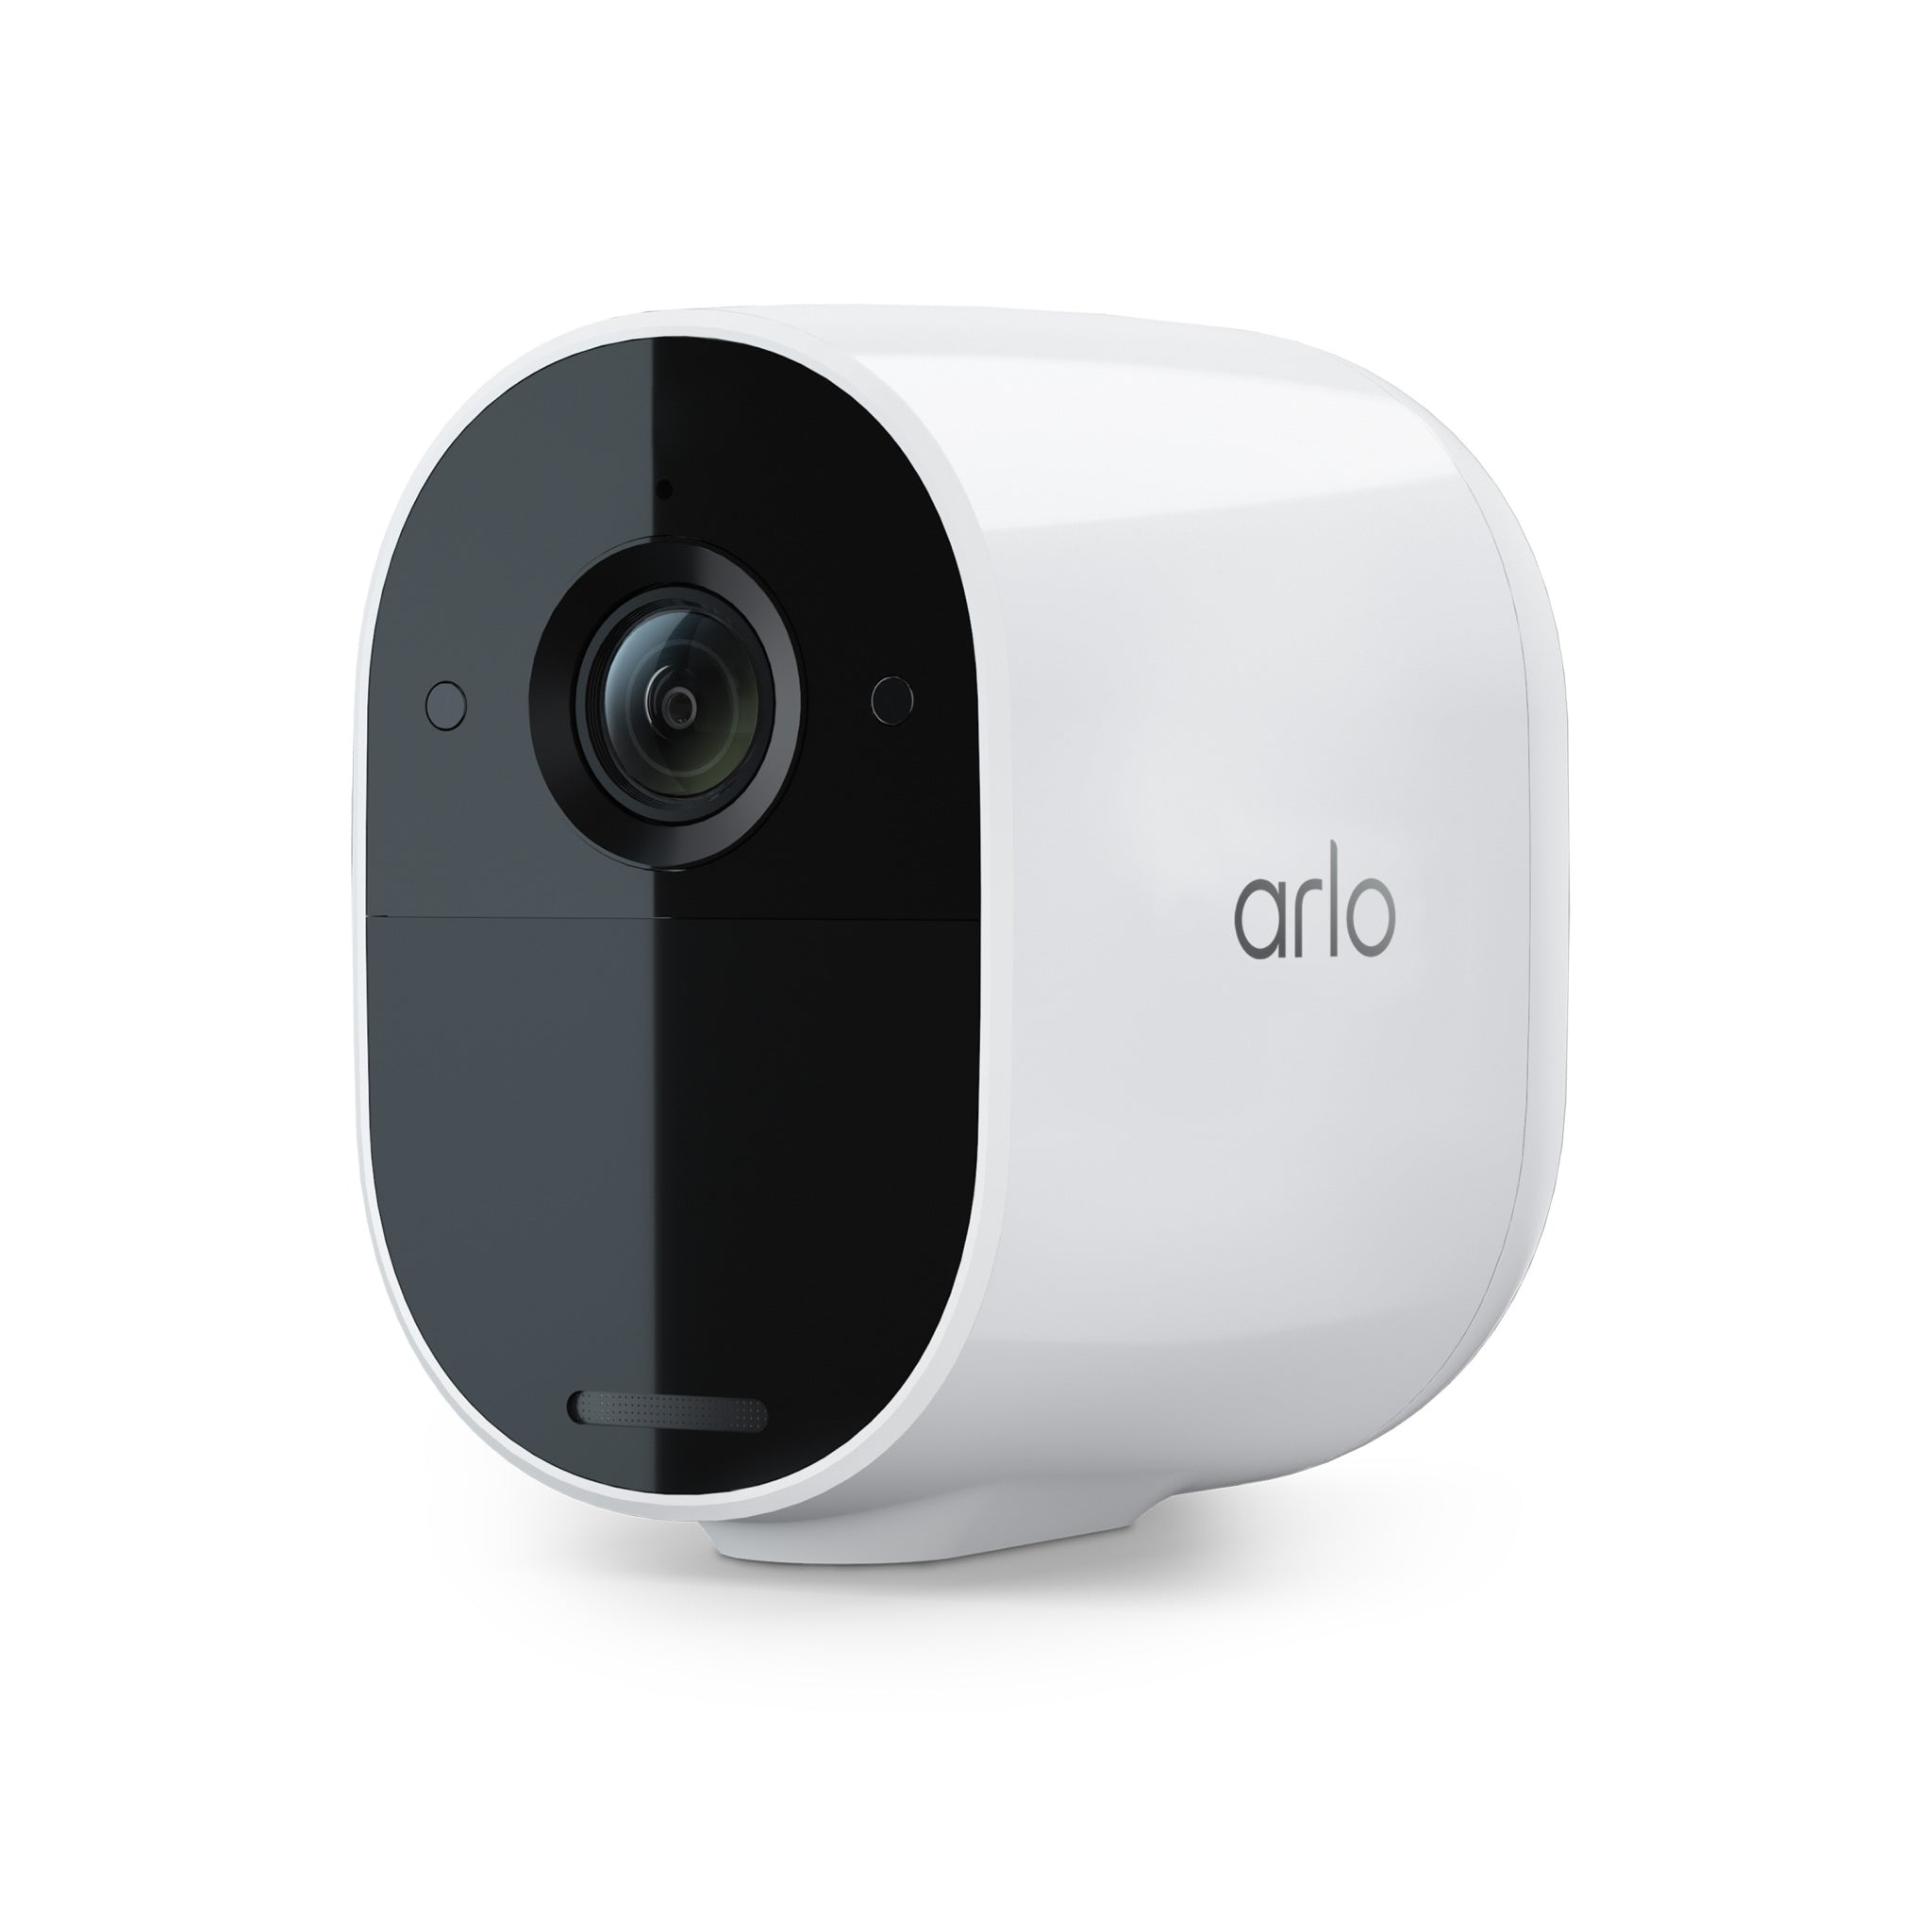 Arlo VMC2020-100NAS Essential 1080p Video Indoor/Outdoor Wireless Security Camera with Night Vision and Audio Siren White - Certified Refurbished